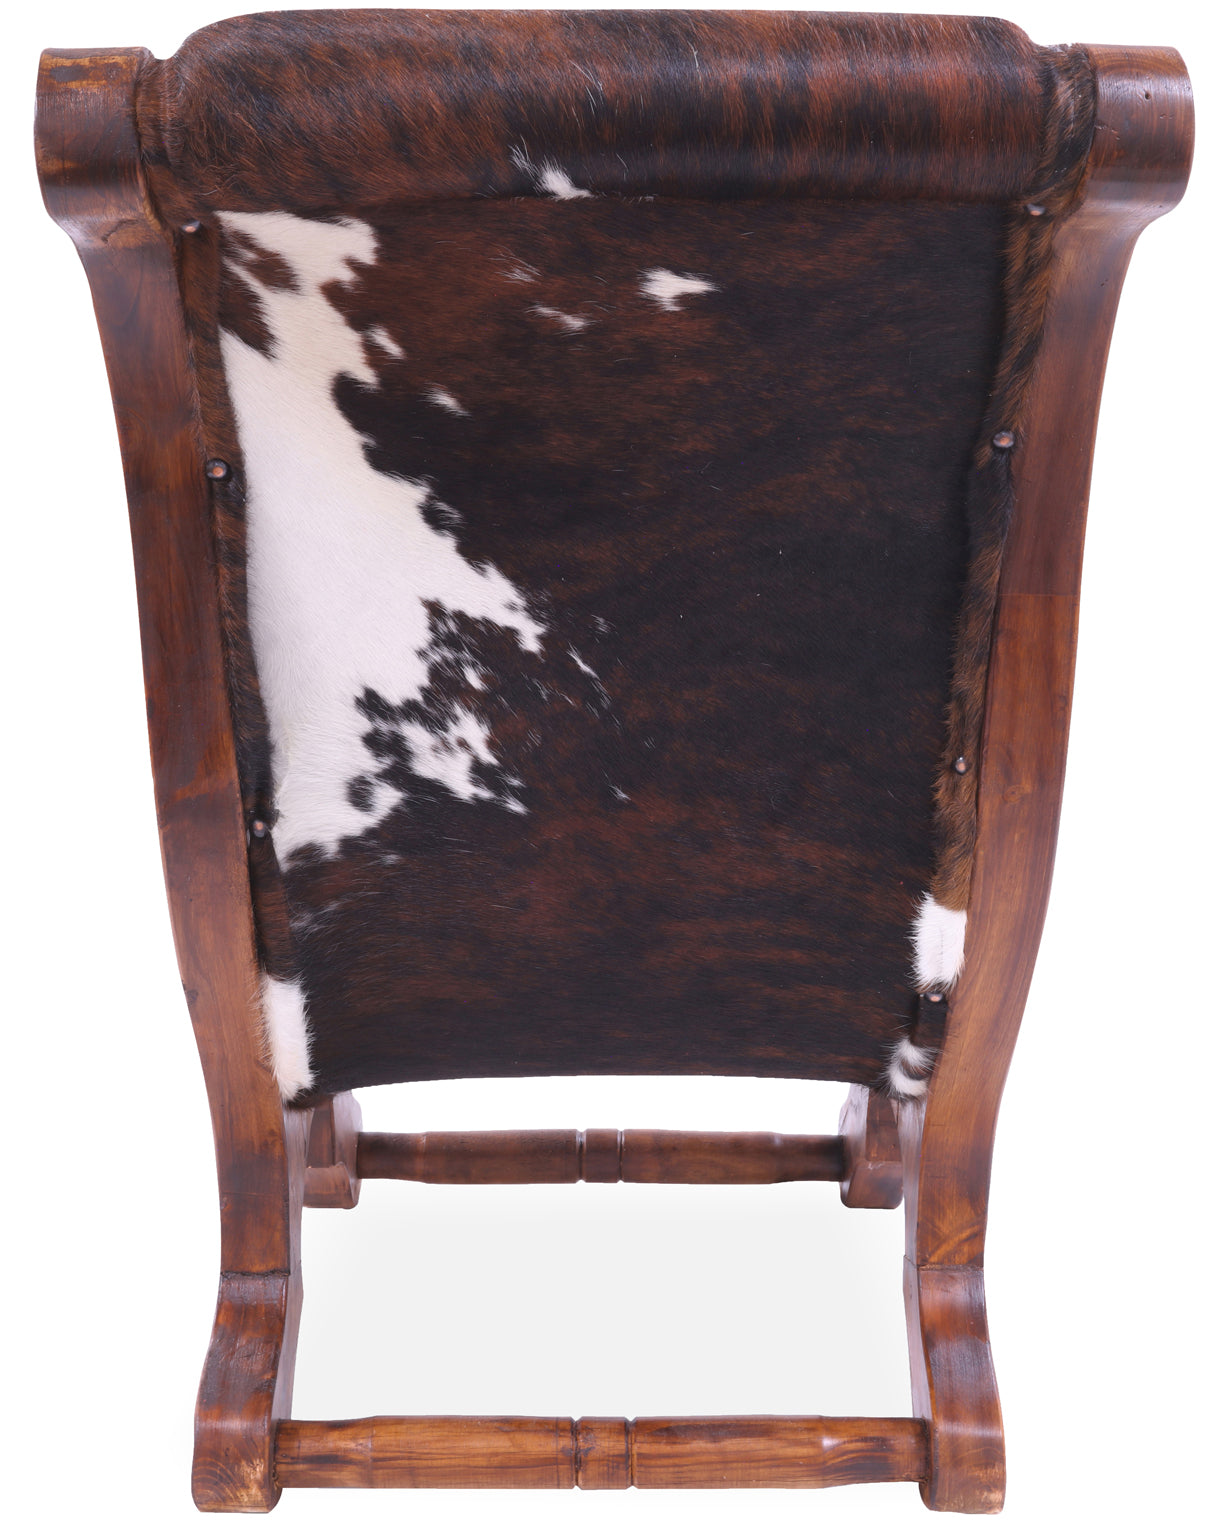 Hair-On Cowhide Handcrafted Reclaimed Wood Chair